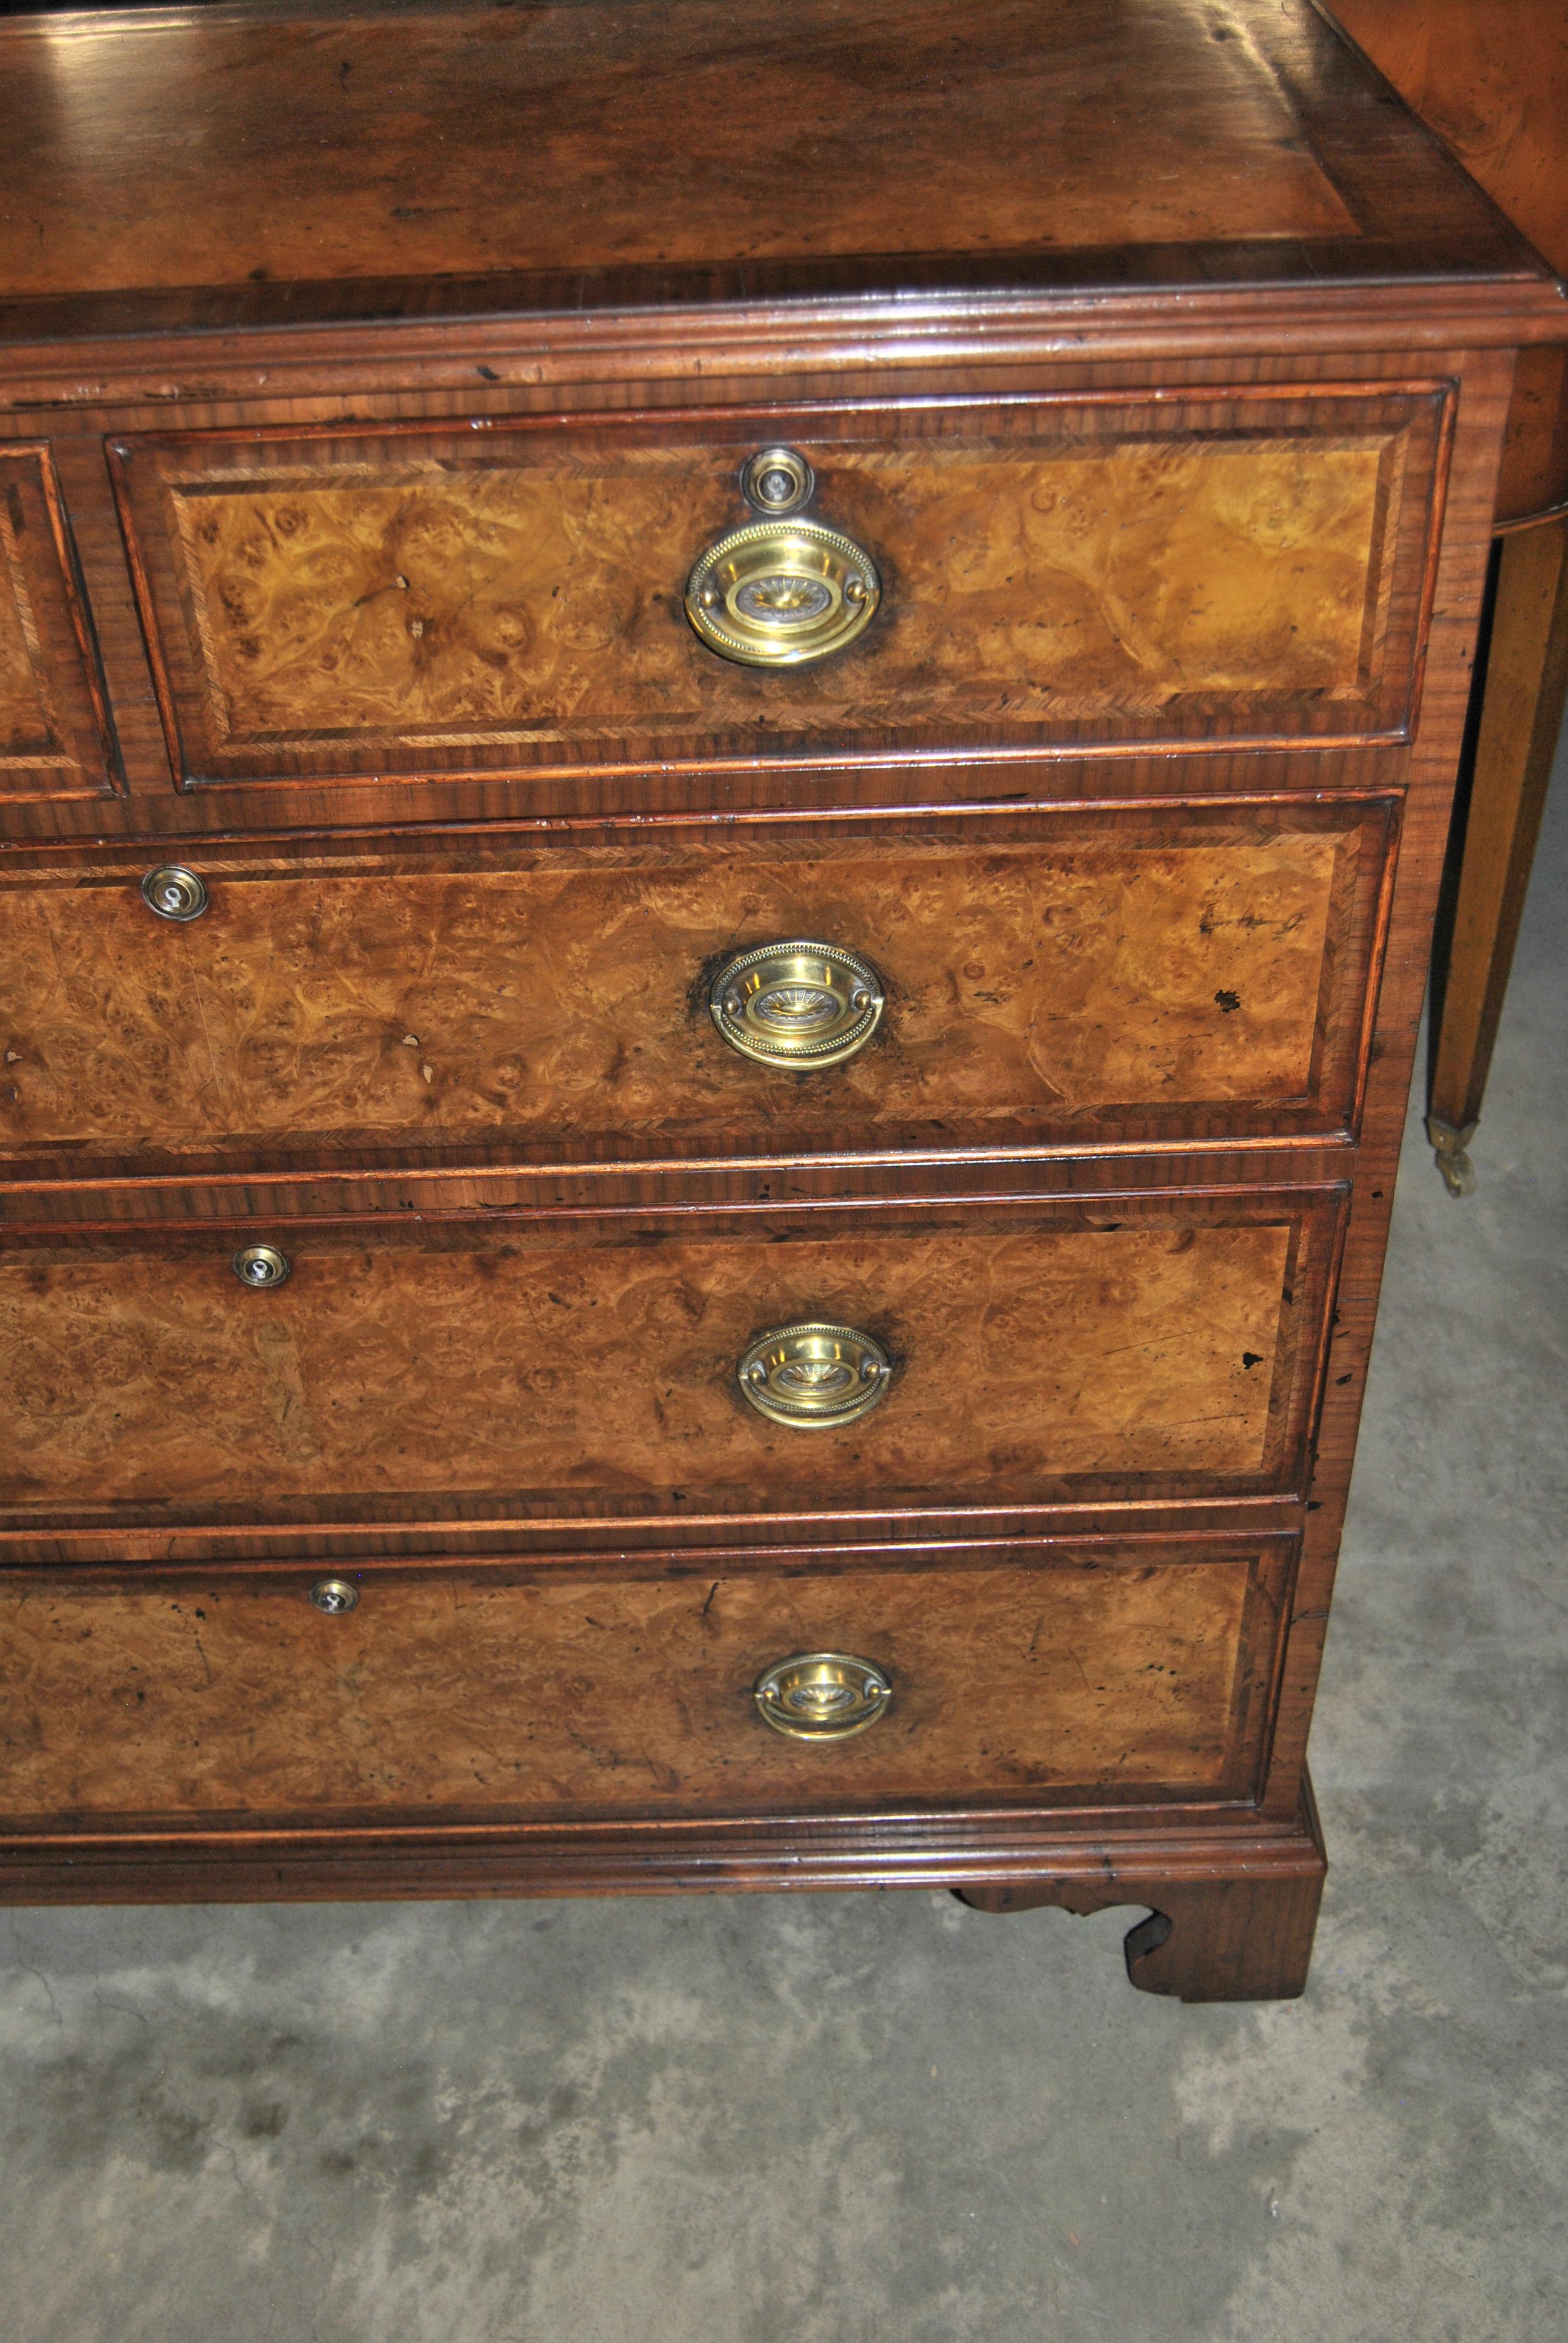 This is a chest of drawers, dresser made in England, circa 1820. The top has a nicely molded edge with a Herringbone walnut inlay and Kashmir walnut to the centre of the top (Kashmir Walnut is the finest cut of Burr Walnut). There are 2 shorter